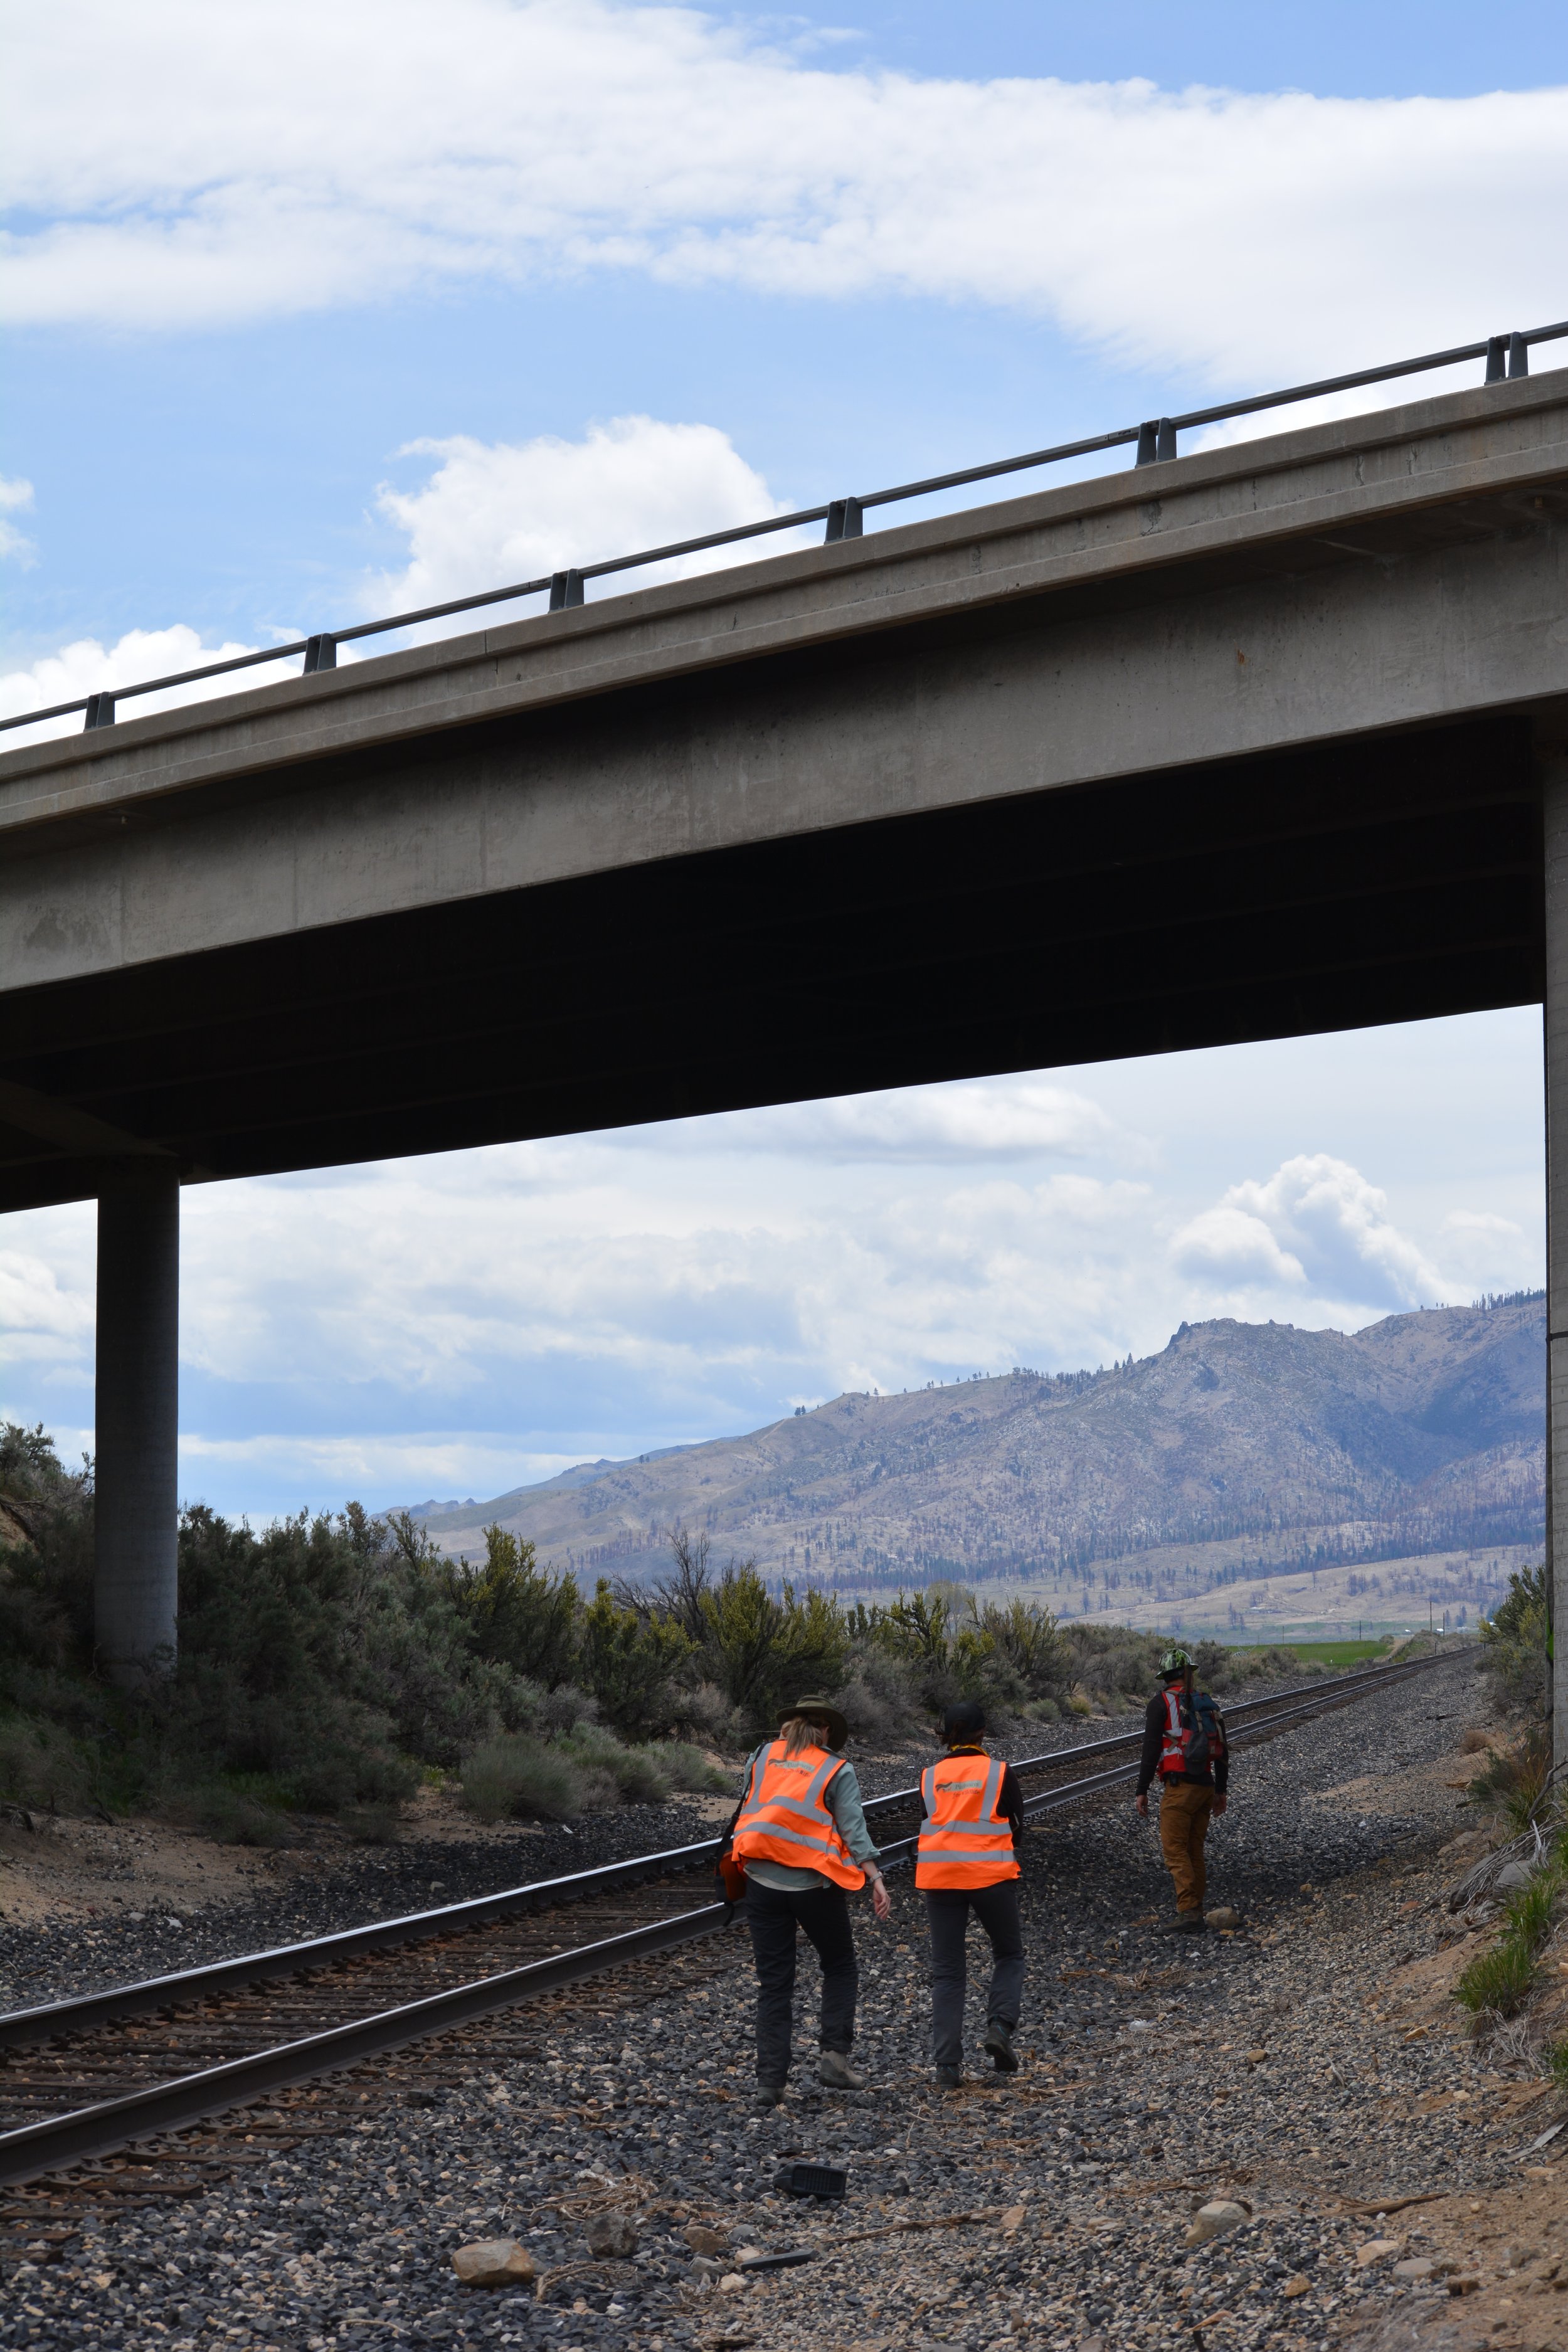  Our study has shown that large bridges, like the one pictured here, are used heavily by migrating mule deer. 